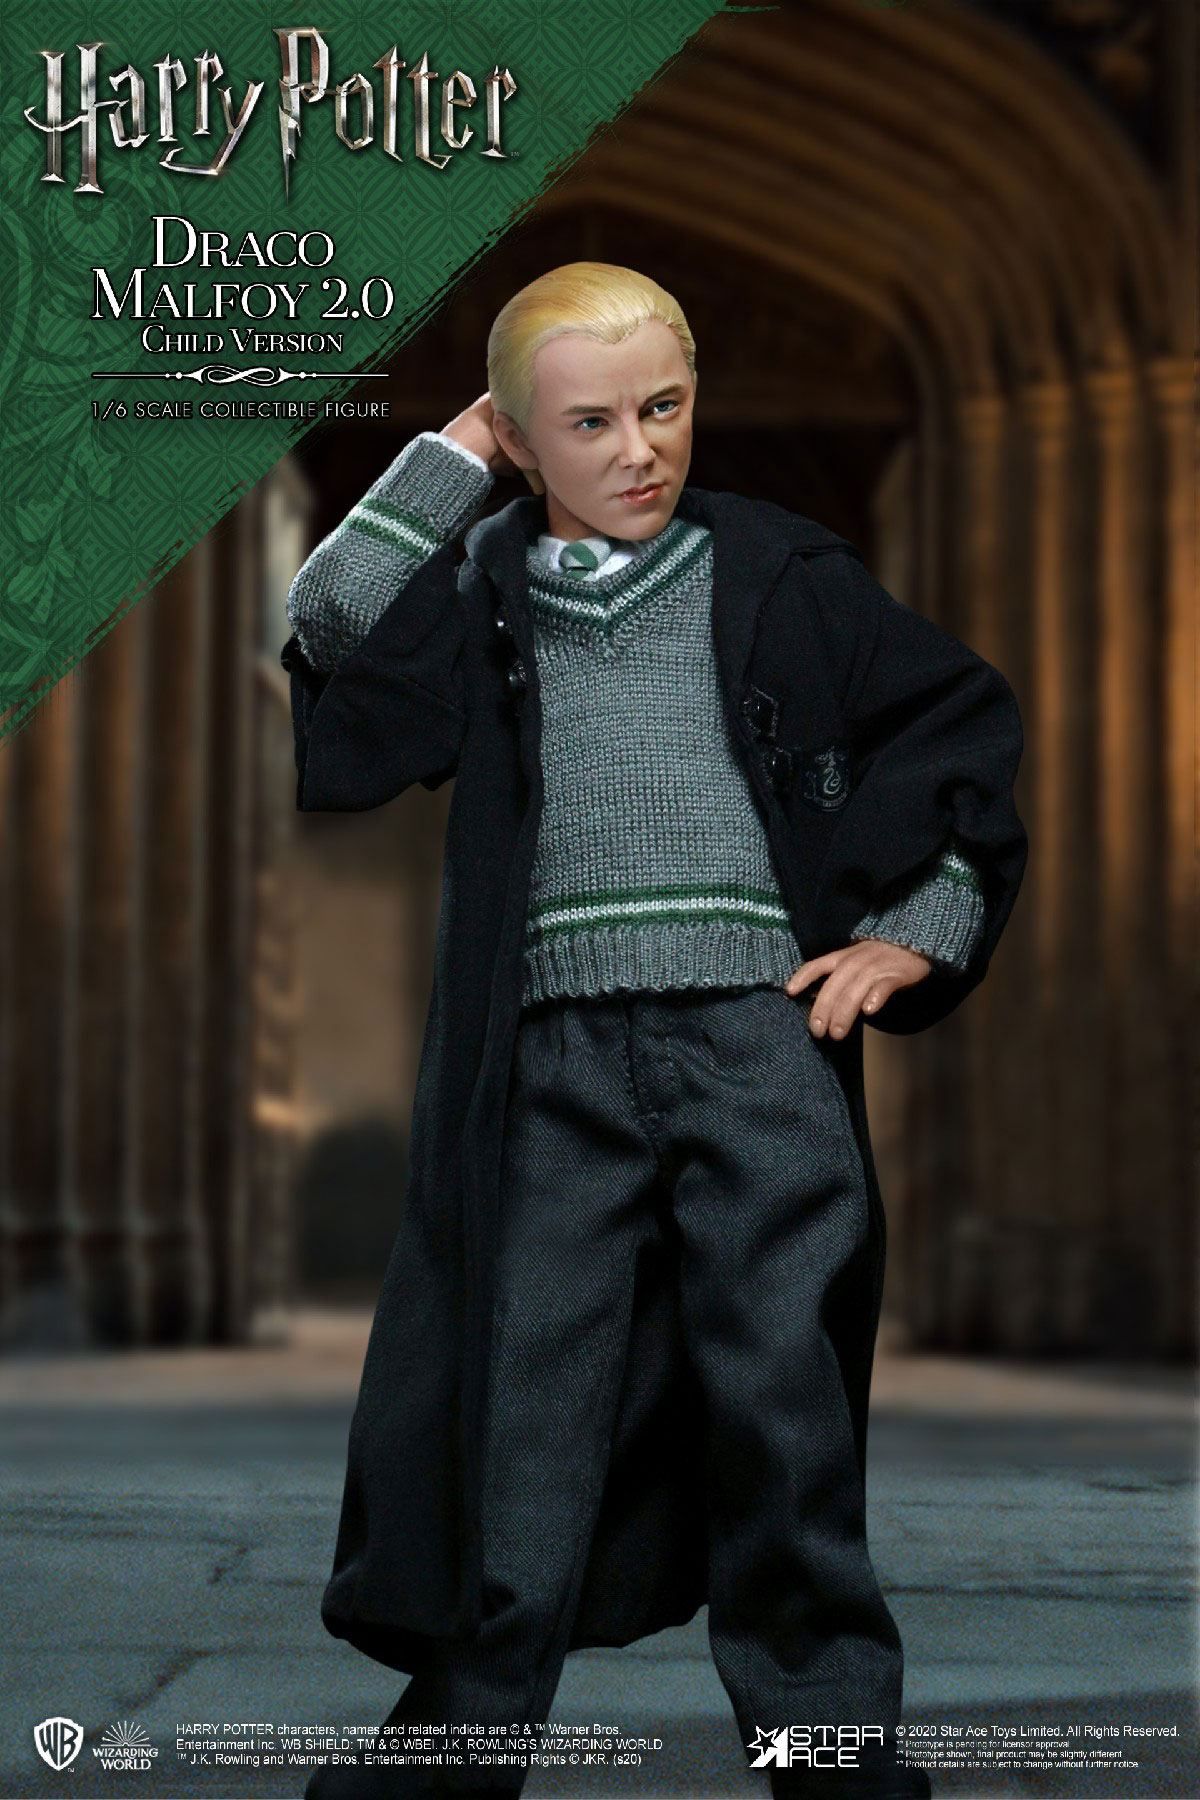 Harry Potter: Draco Malfoy Teenager Suit Version Harry Potter 1/6 ...